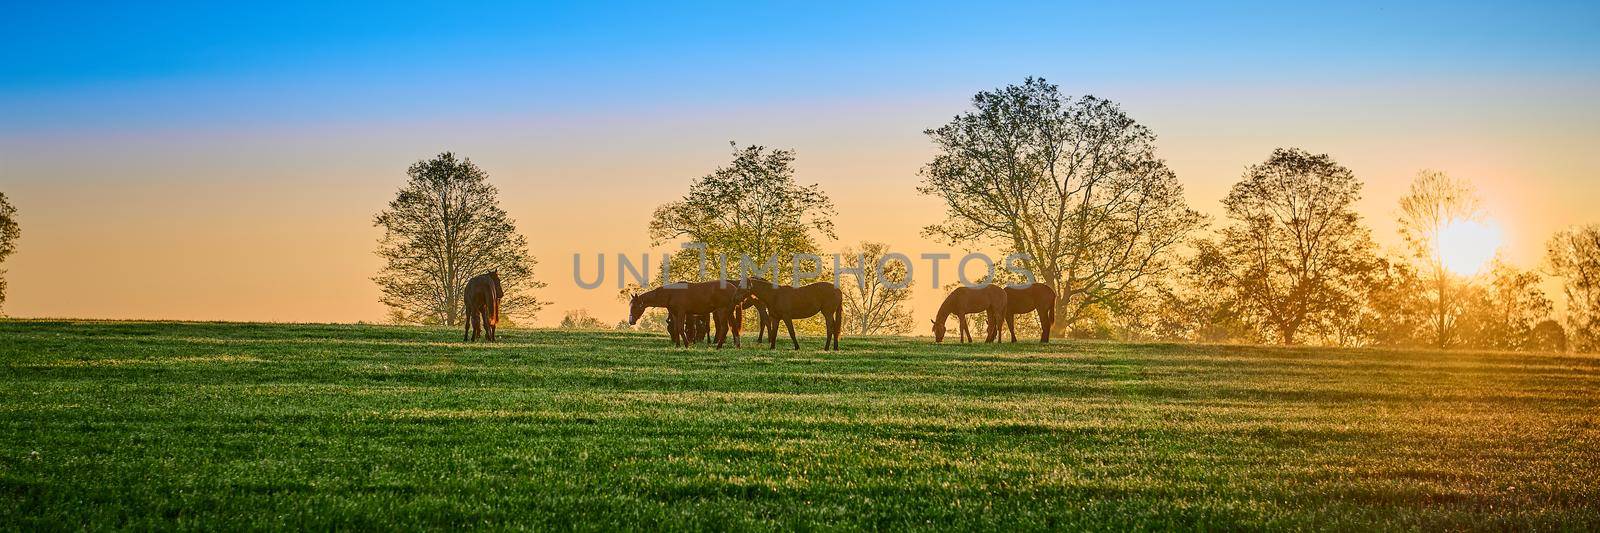 Thoroughbred horses grazing in a field at sunrise. by patrickstock